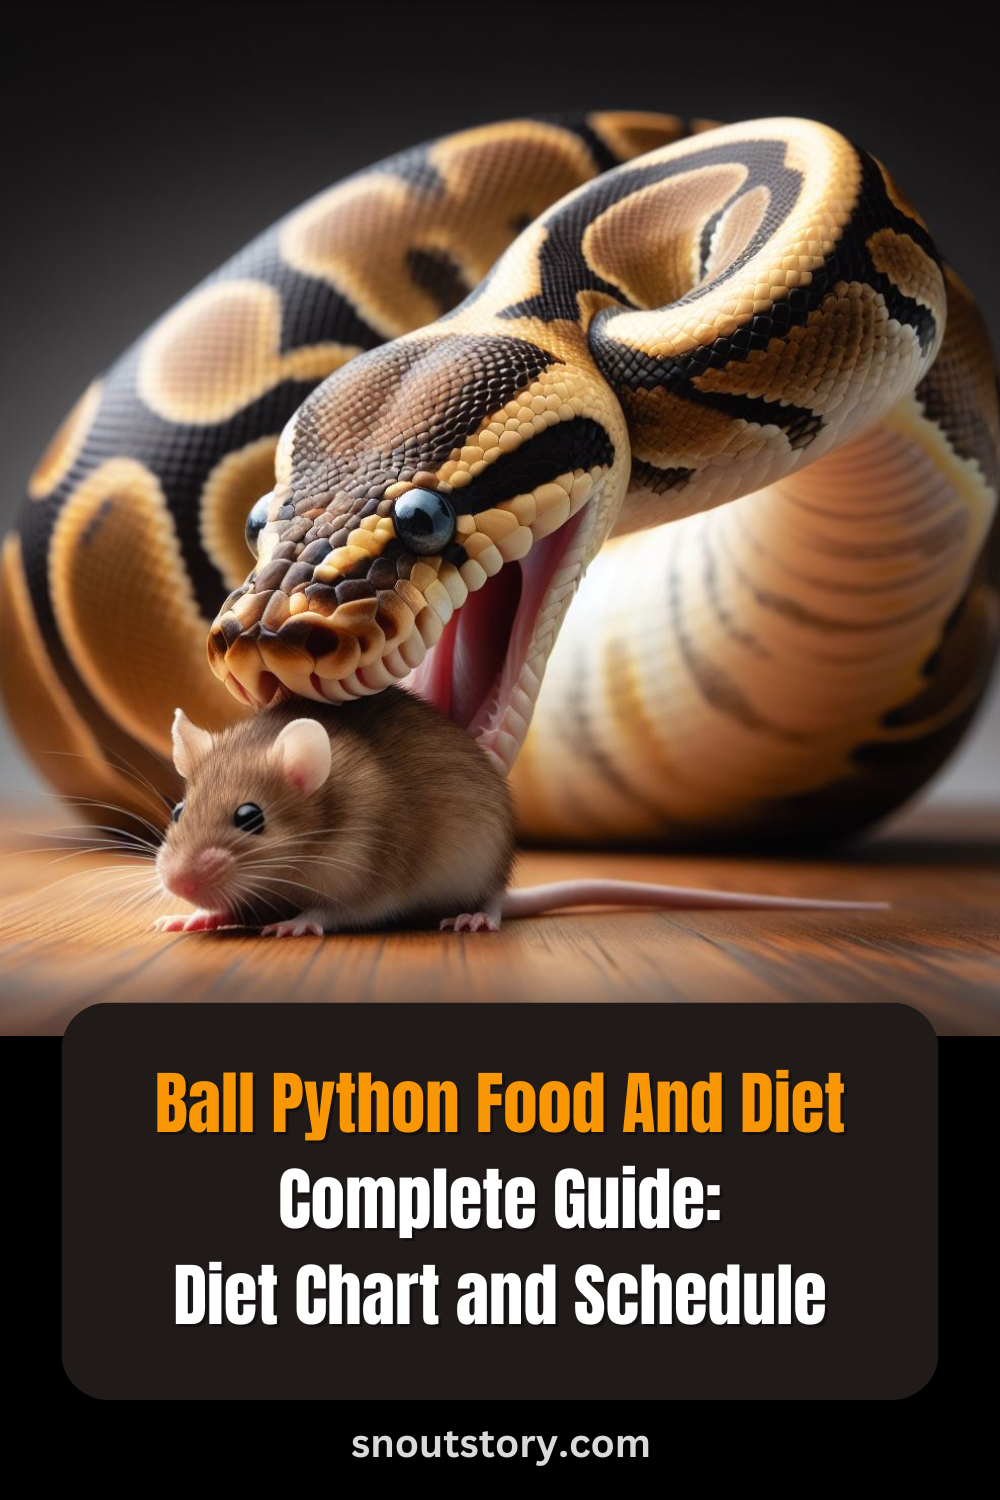 Ball Python Food And Diet: A Comprehensive Guide